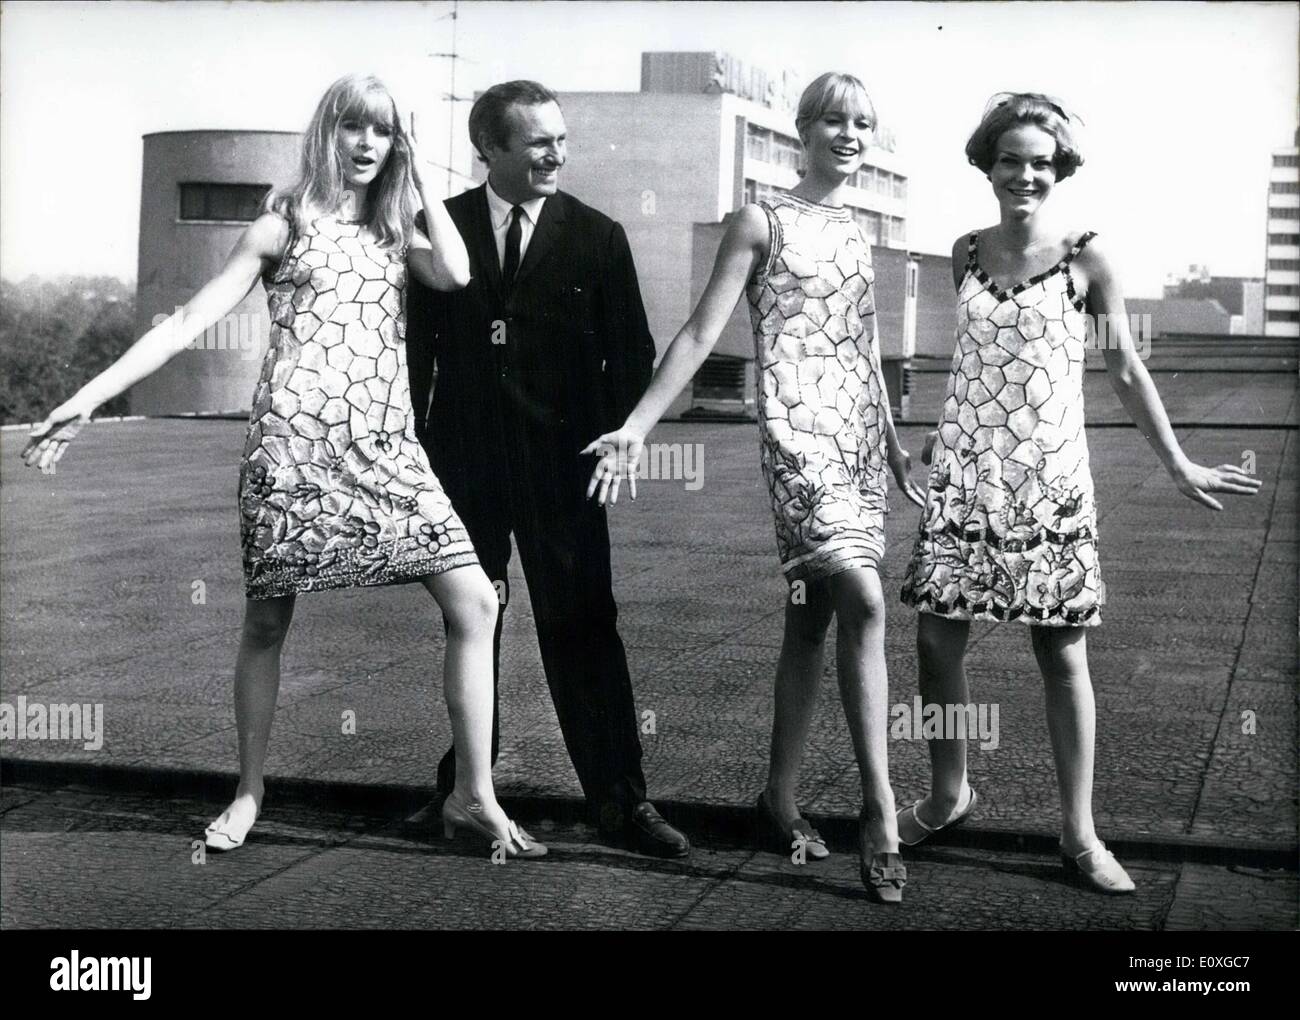 Sep. 13, 1966 - Pictured is fashion designer Louis Feraud on the rooftops  of Berlin. He is shown here with several of his models. The three models  are all named ''Tiffany'' and